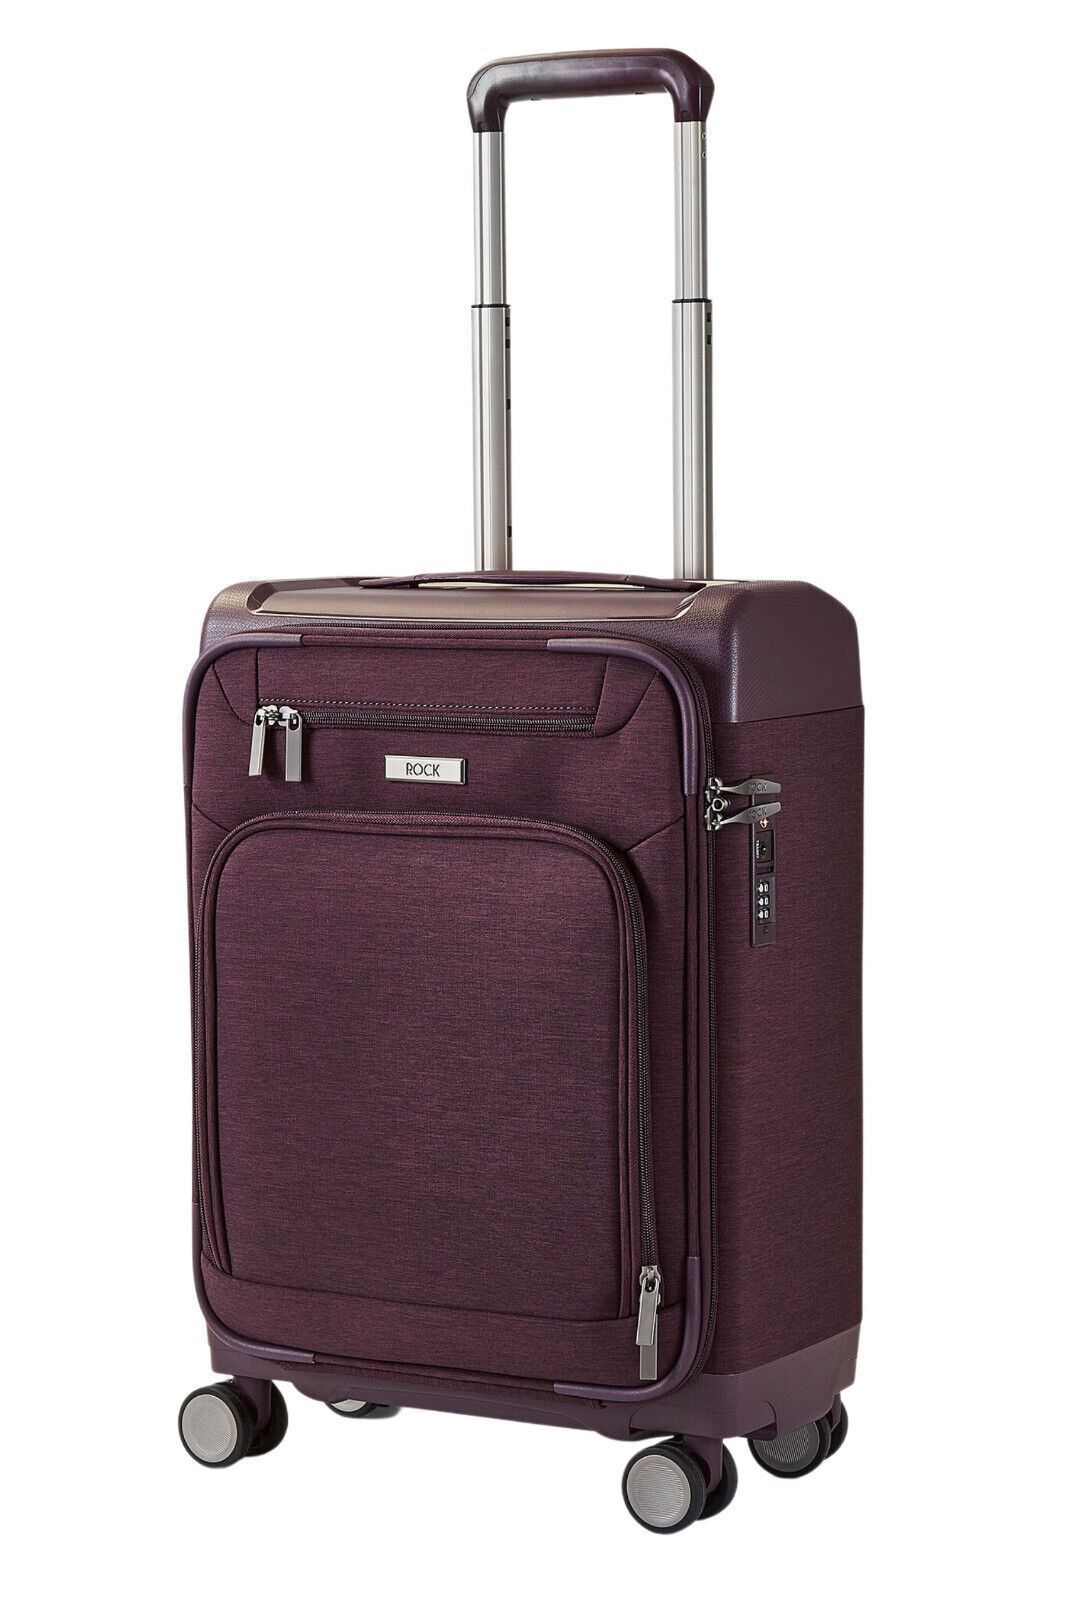 Lightweight Soft Suitcase 4 Wheel Luggage Travel Trolley Cases Cabin Bags - Upperclass Fashions 